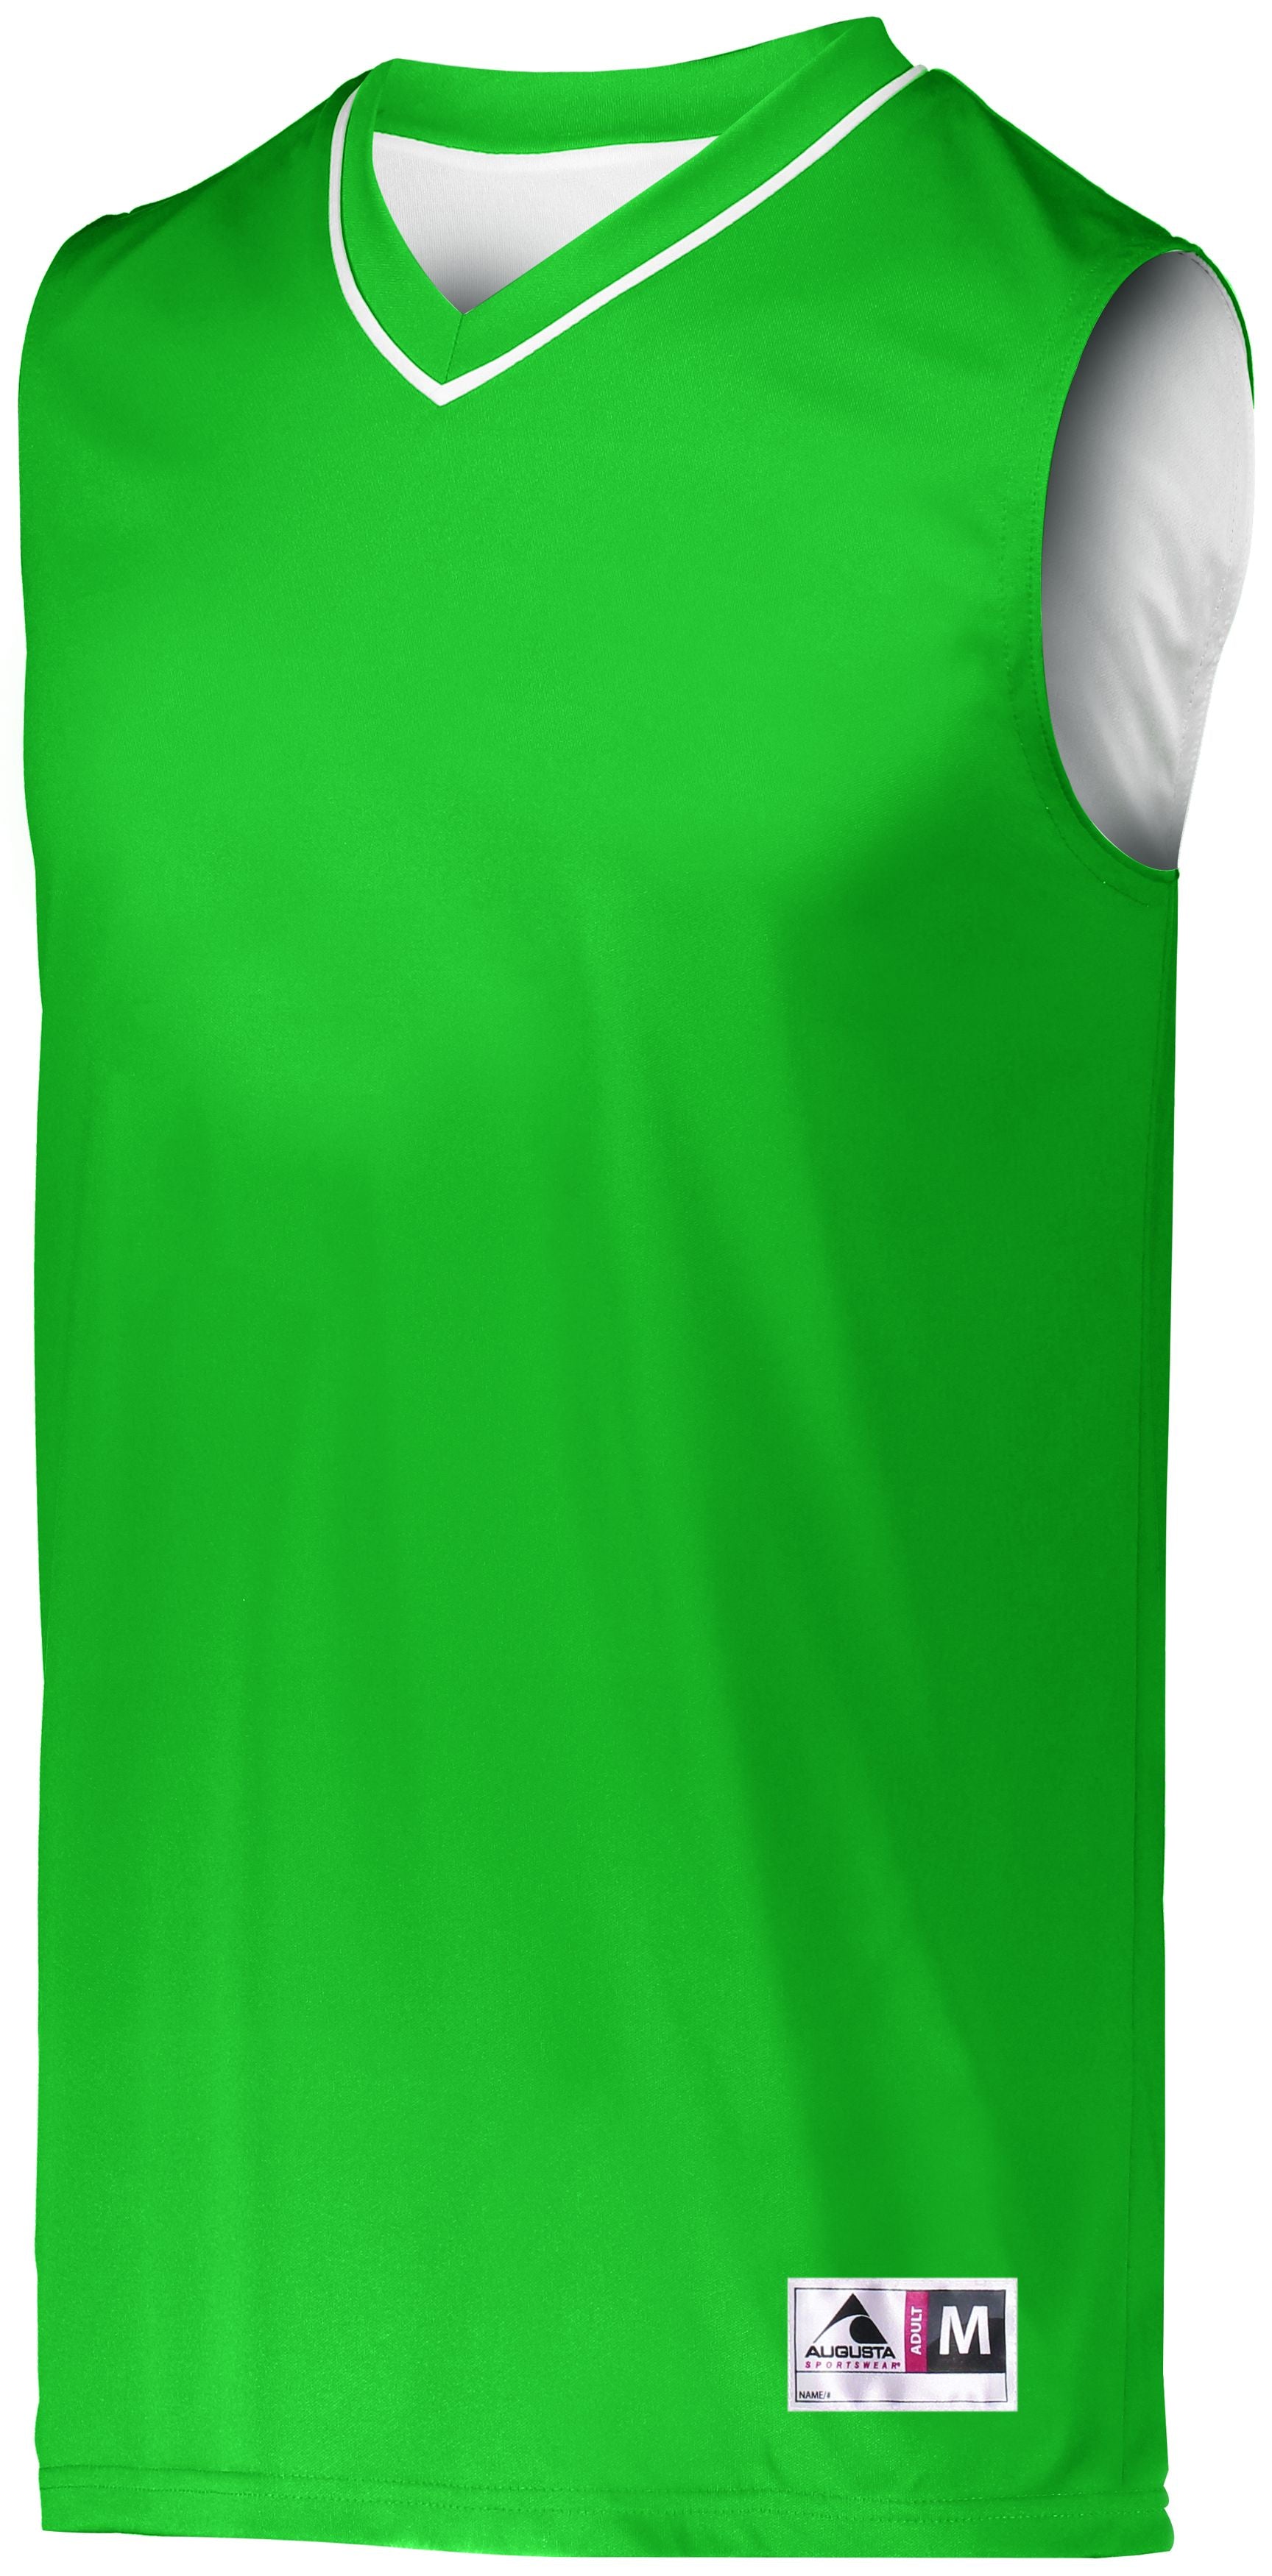 Augusta Sportswear Youth Reversible Two-Color Jersey in Kelly/White  -Part of the Youth, Youth-Jersey, Augusta-Products, Basketball, Shirts, All-Sports, All-Sports-1 product lines at KanaleyCreations.com